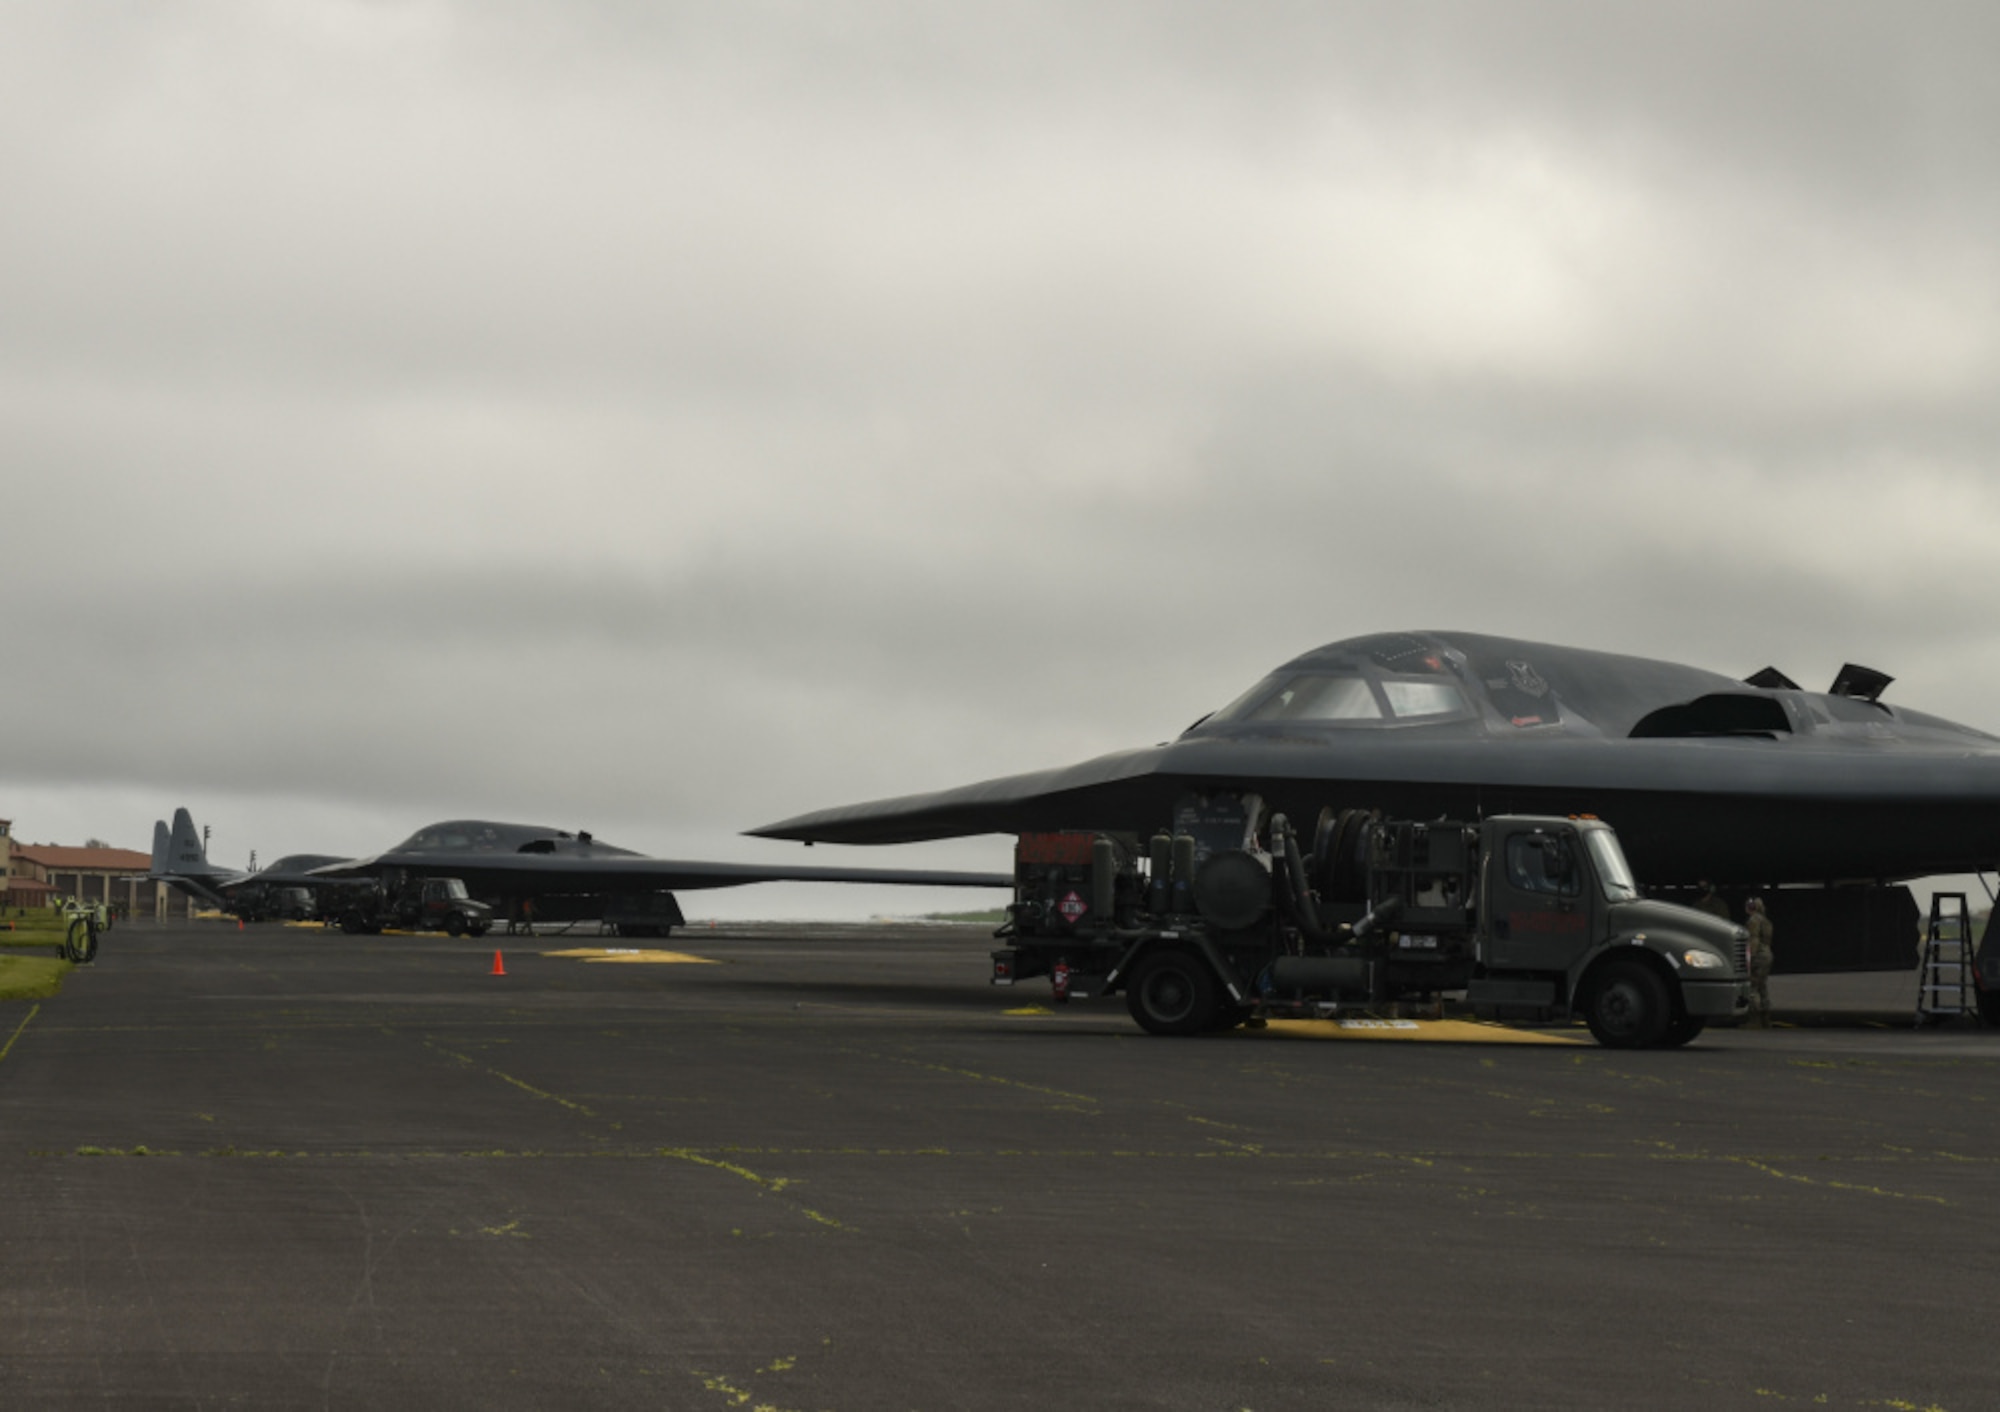 Active-duty and Air National Guard Airmen assigned to Whiteman Air Force Base, Mo., deployed to Lajes Field in support of Bomber Task Force Europe.